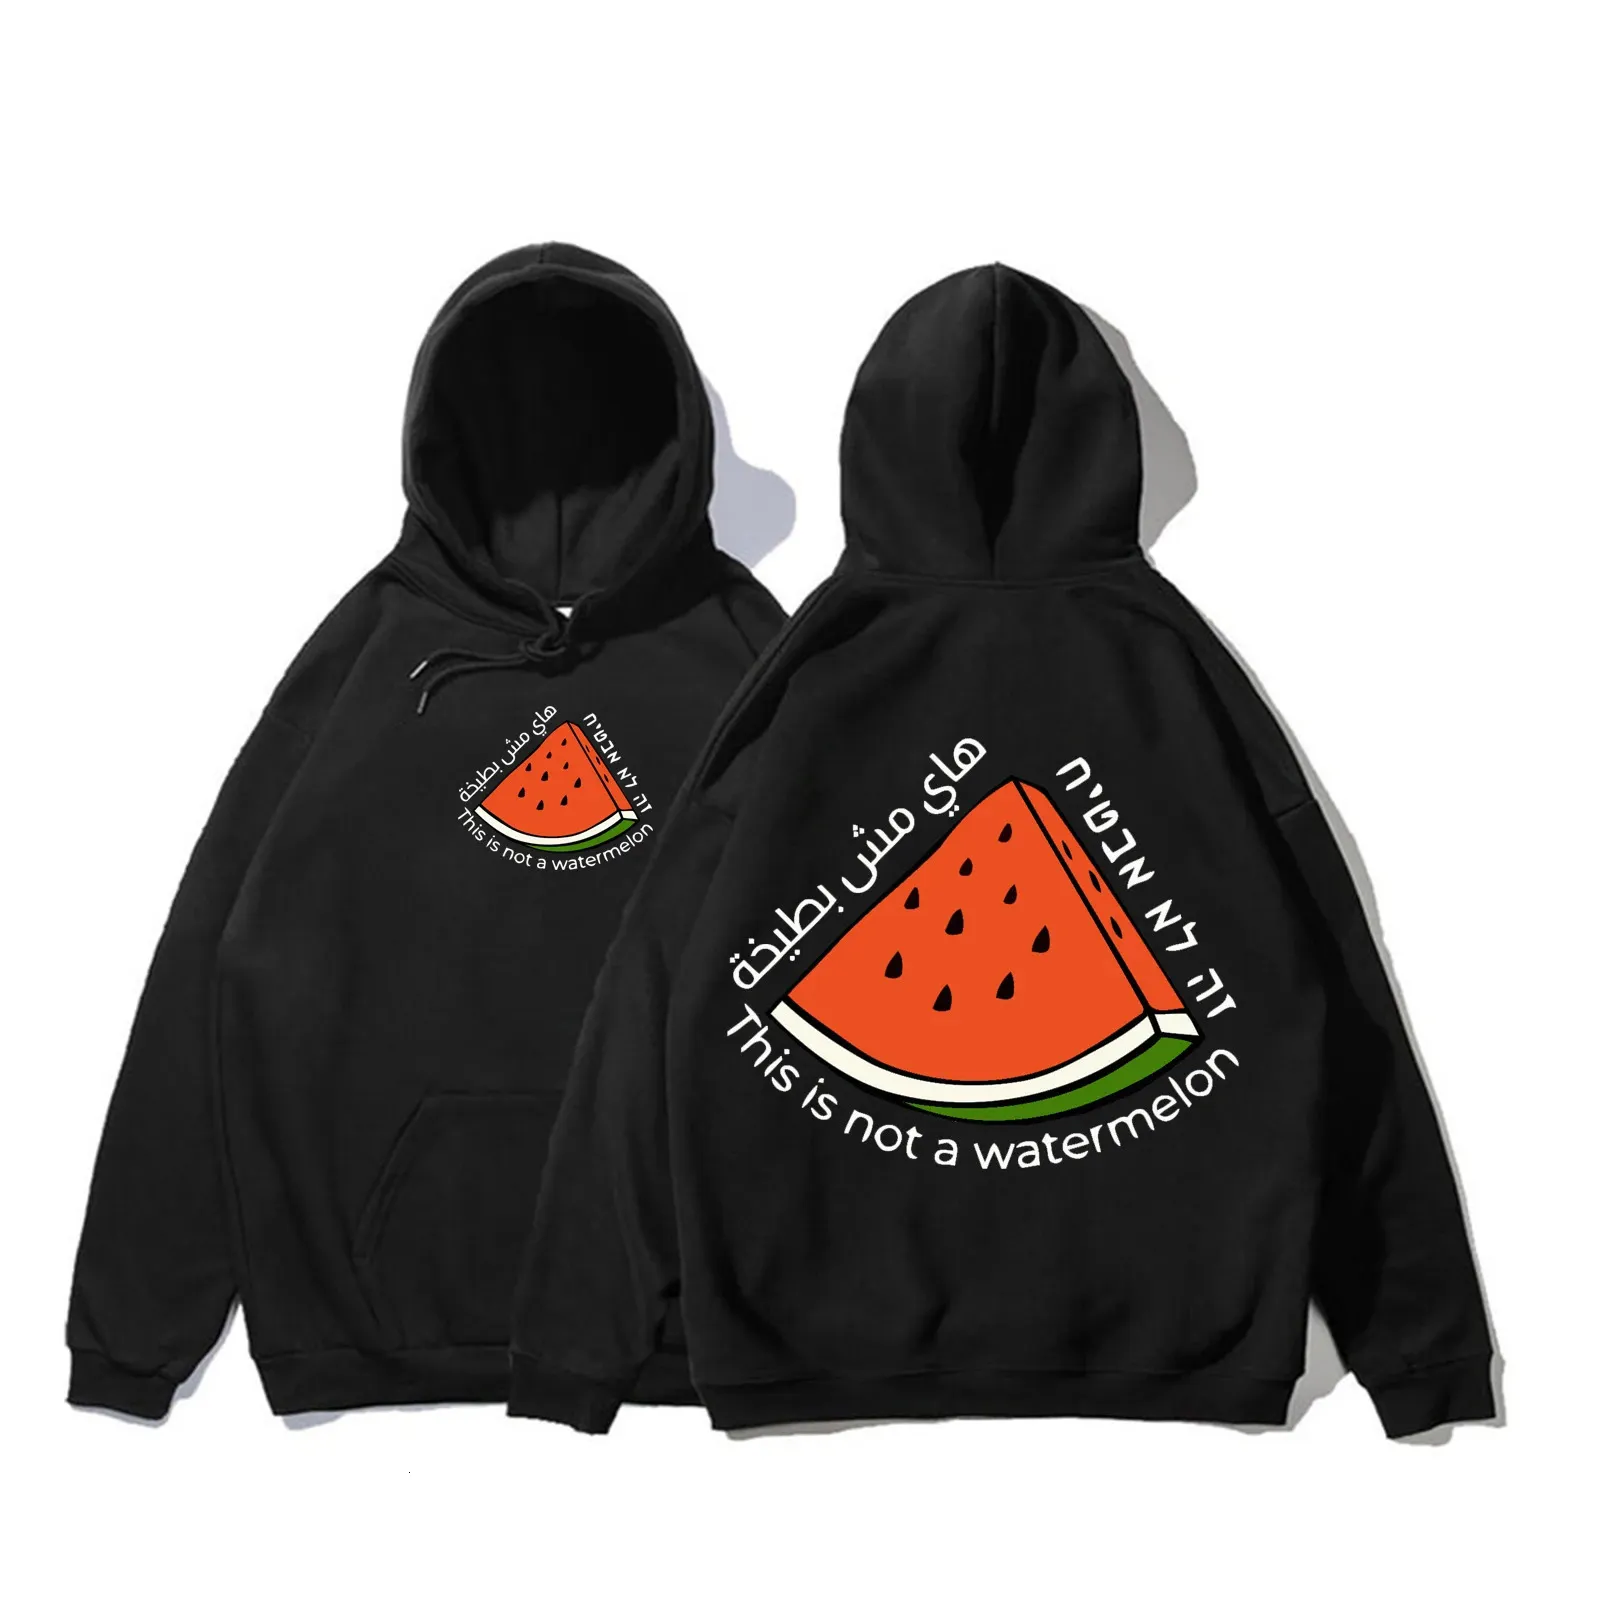 This Is Not A Watermelon Palestine Collection Hoodie Man Woman Harajuku Hip Hop Pullover Tops Streetwear 231228